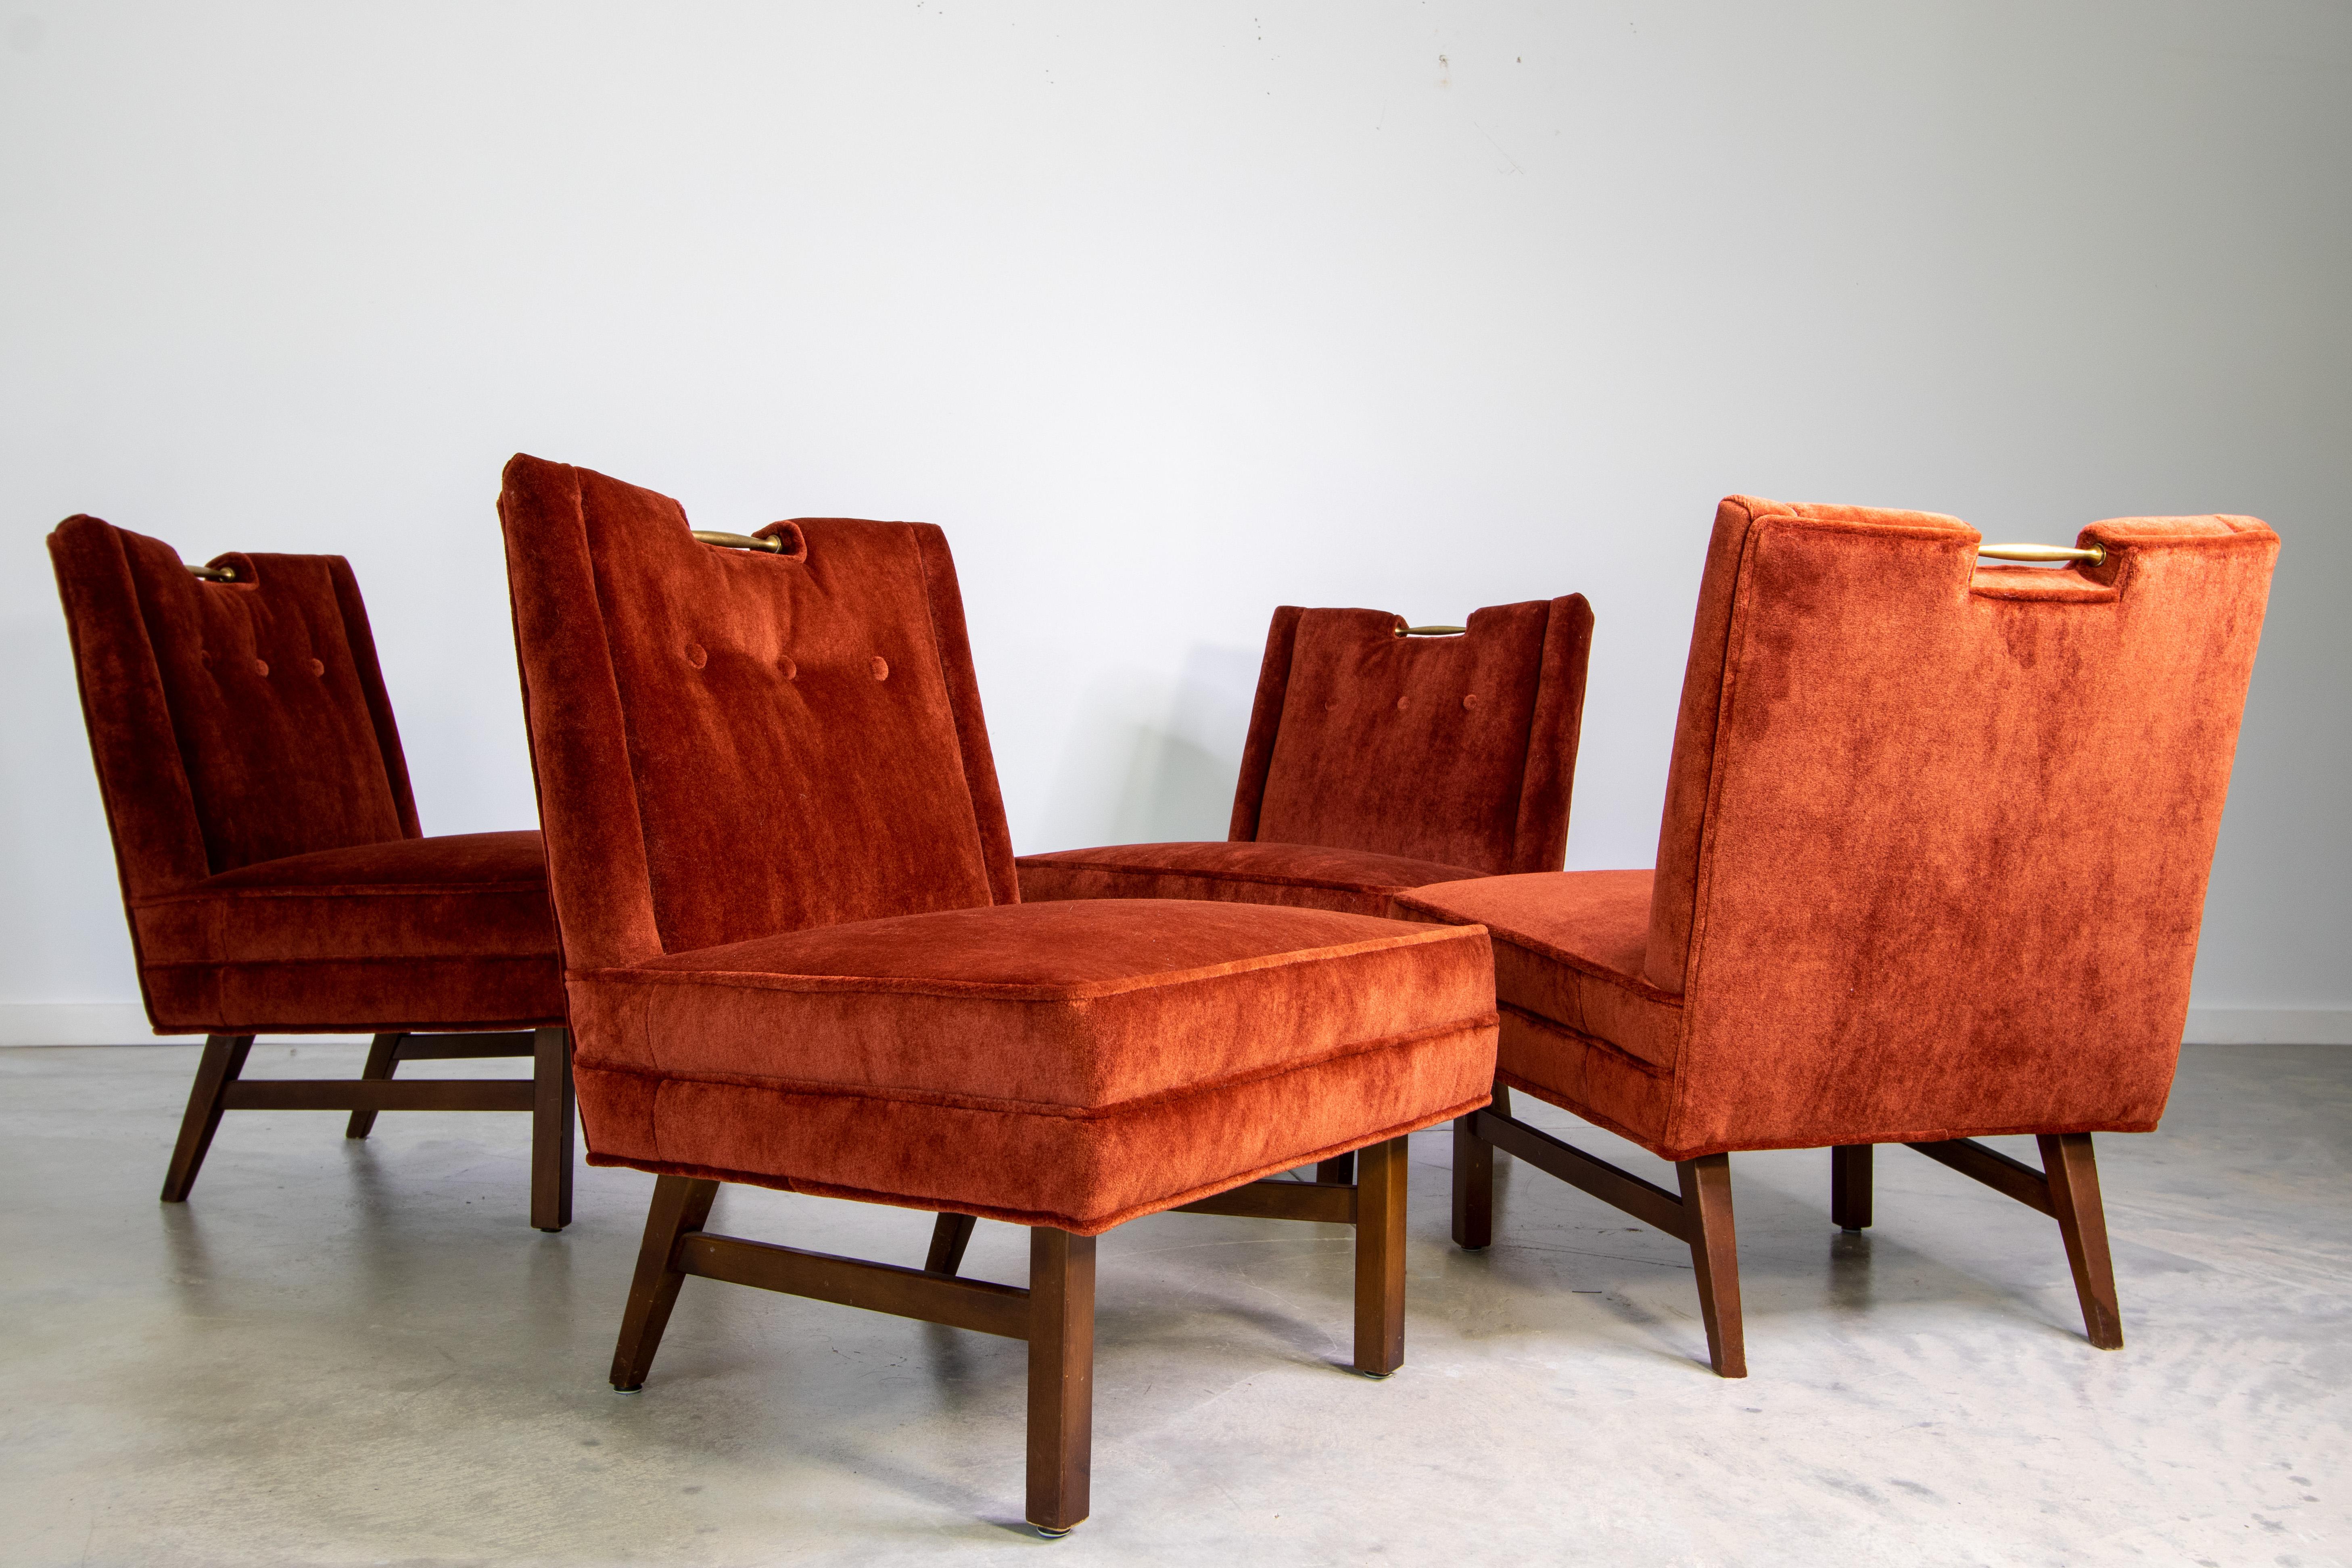 A set of four cocktail slipper chairs designed by Merton Gershun for American of Martinsville. These have often been attributed to Harvey Probber, but we were able to locate an original advertisement accrediting the correct designer. These chairs